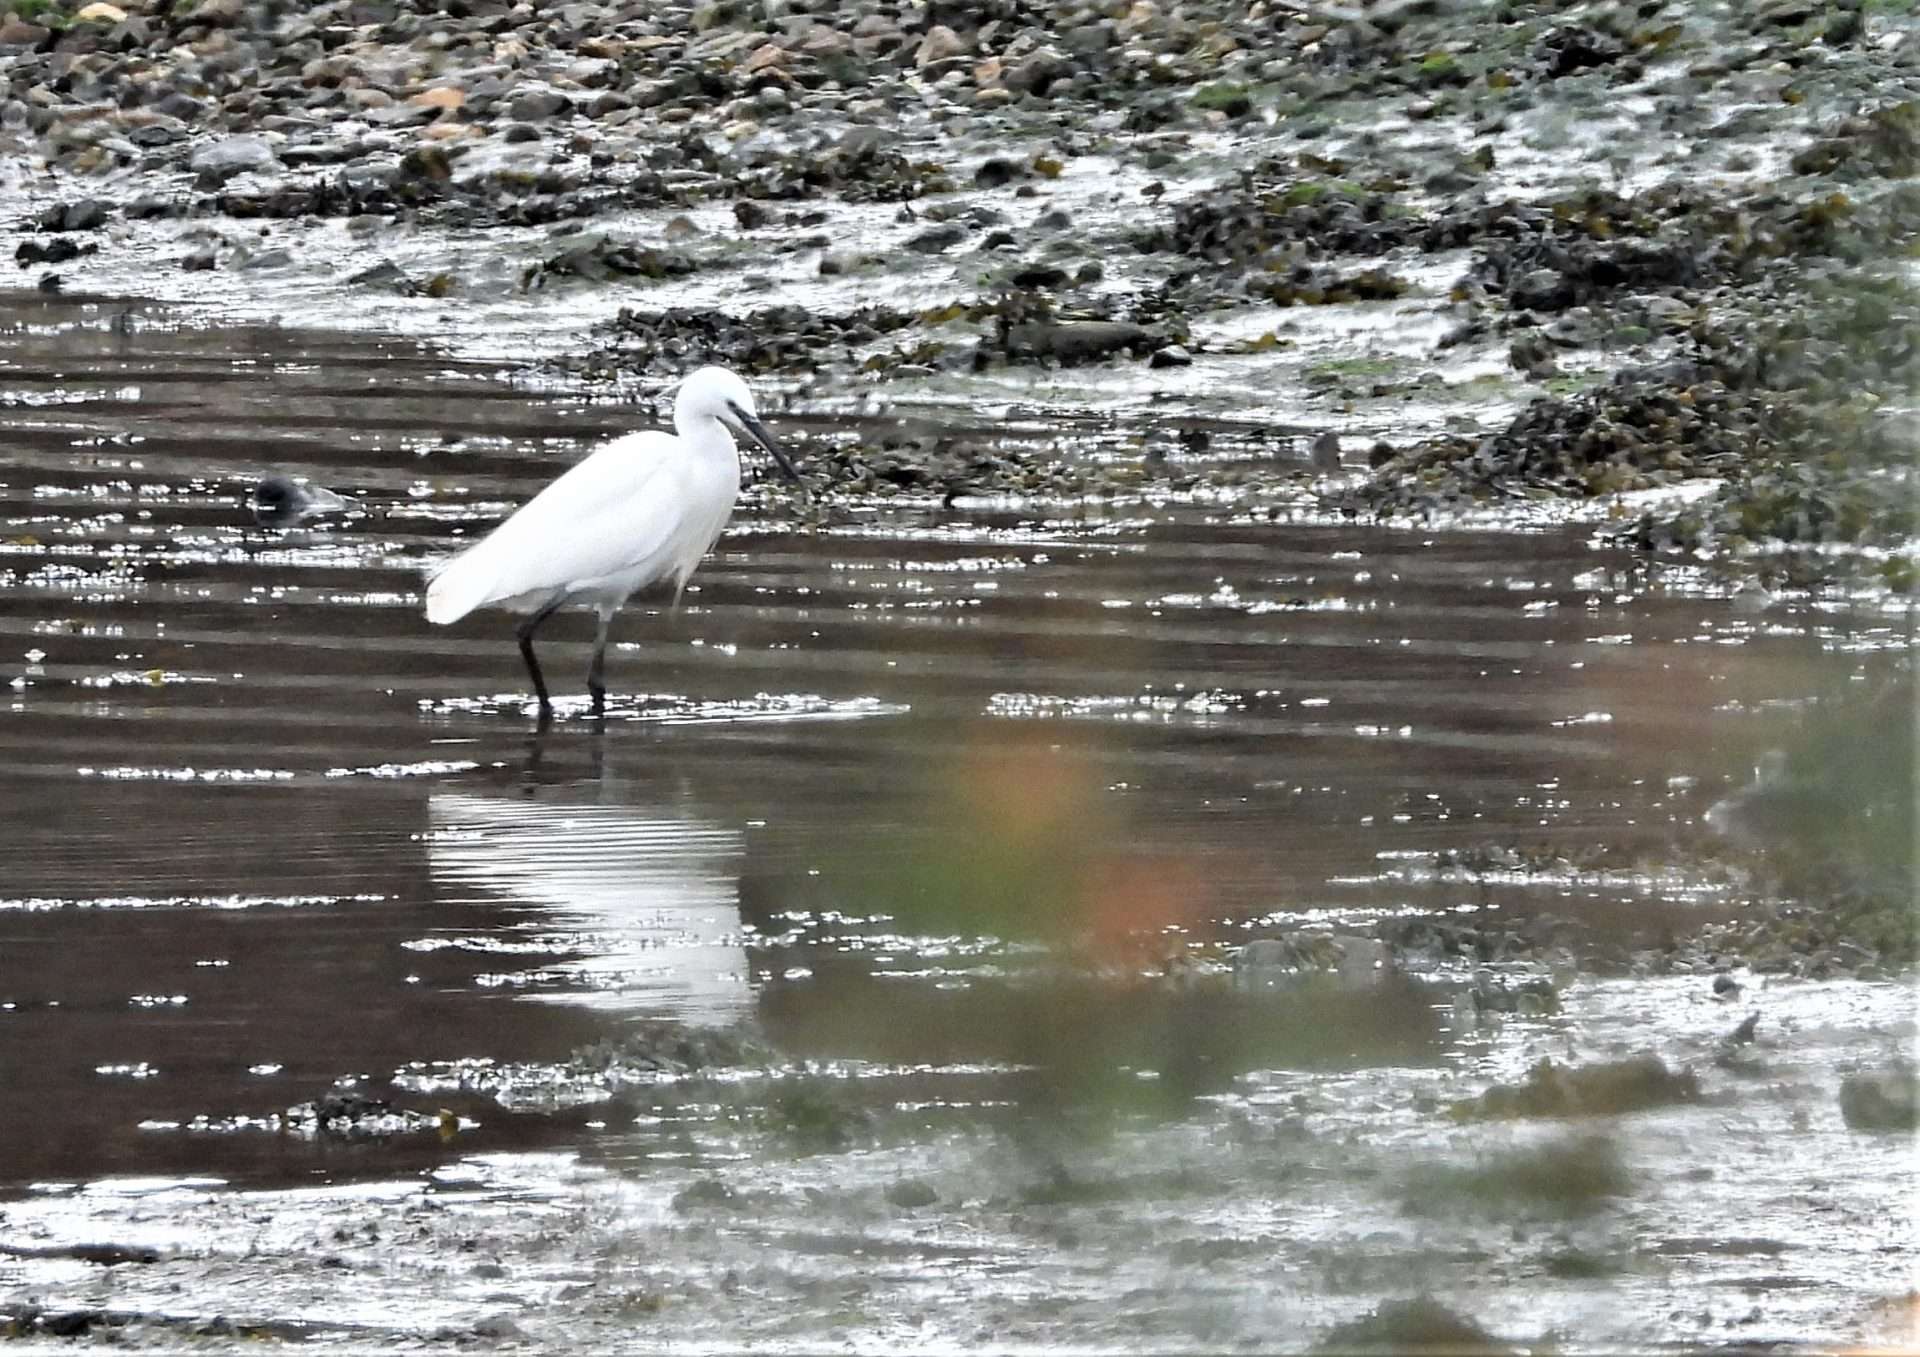 Little Egret by Kenneth Bradley at Combe cellars